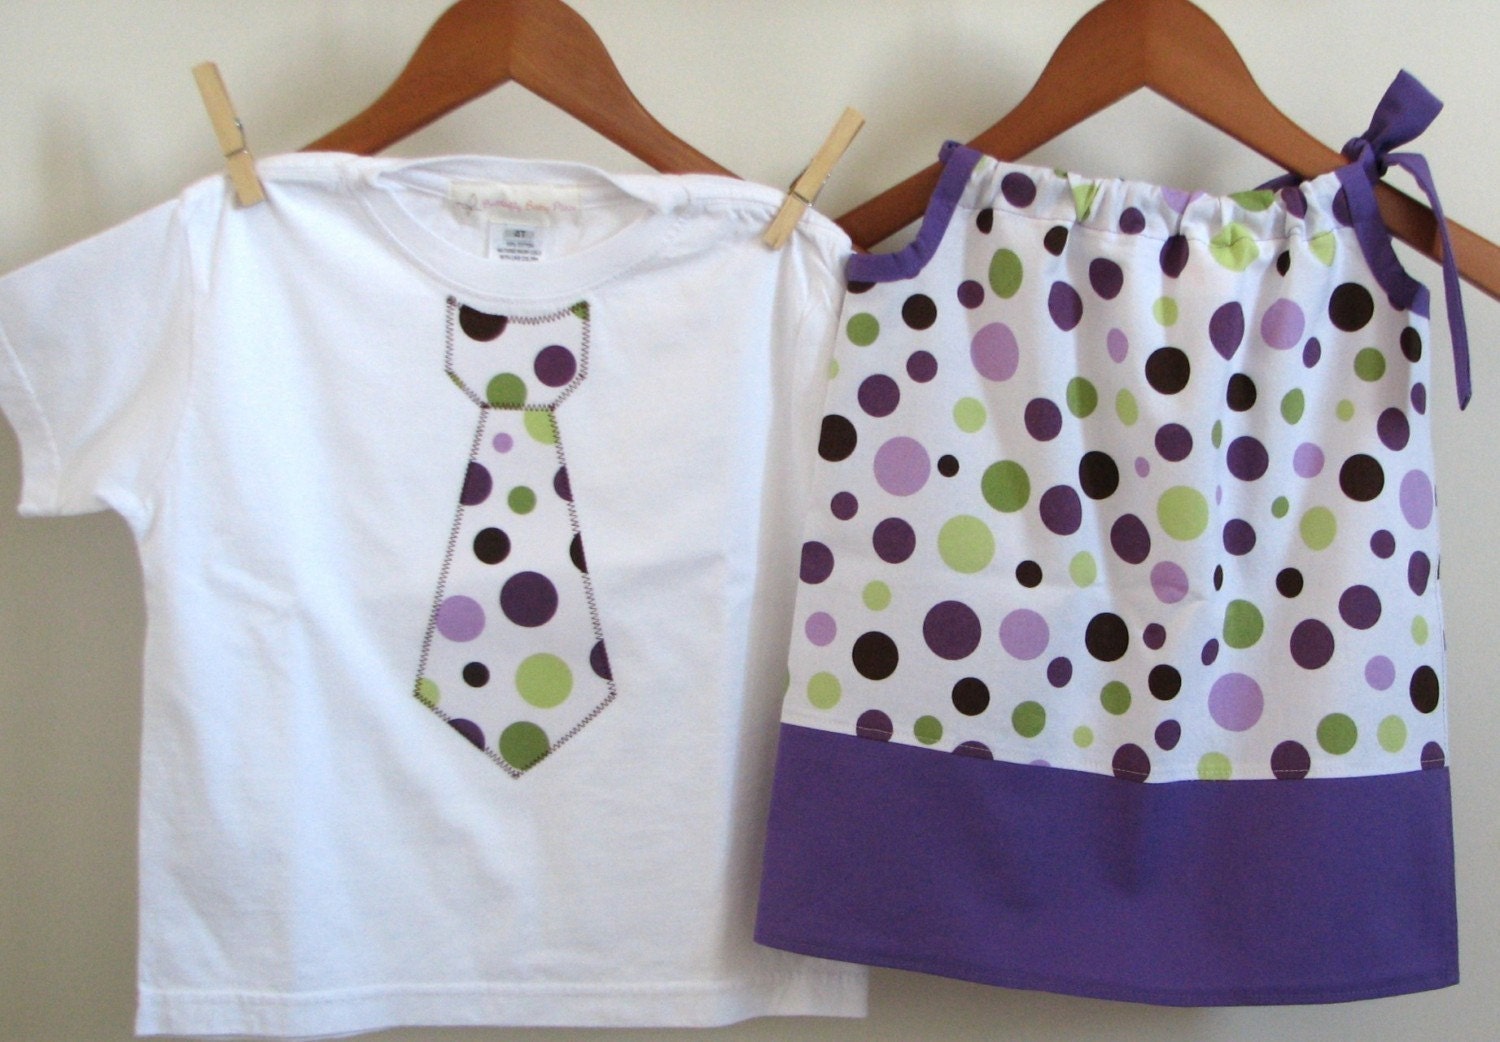 Brother and Sister Set includes Pillowcase Dress with Matching Tie Shirt in Lolli Dot